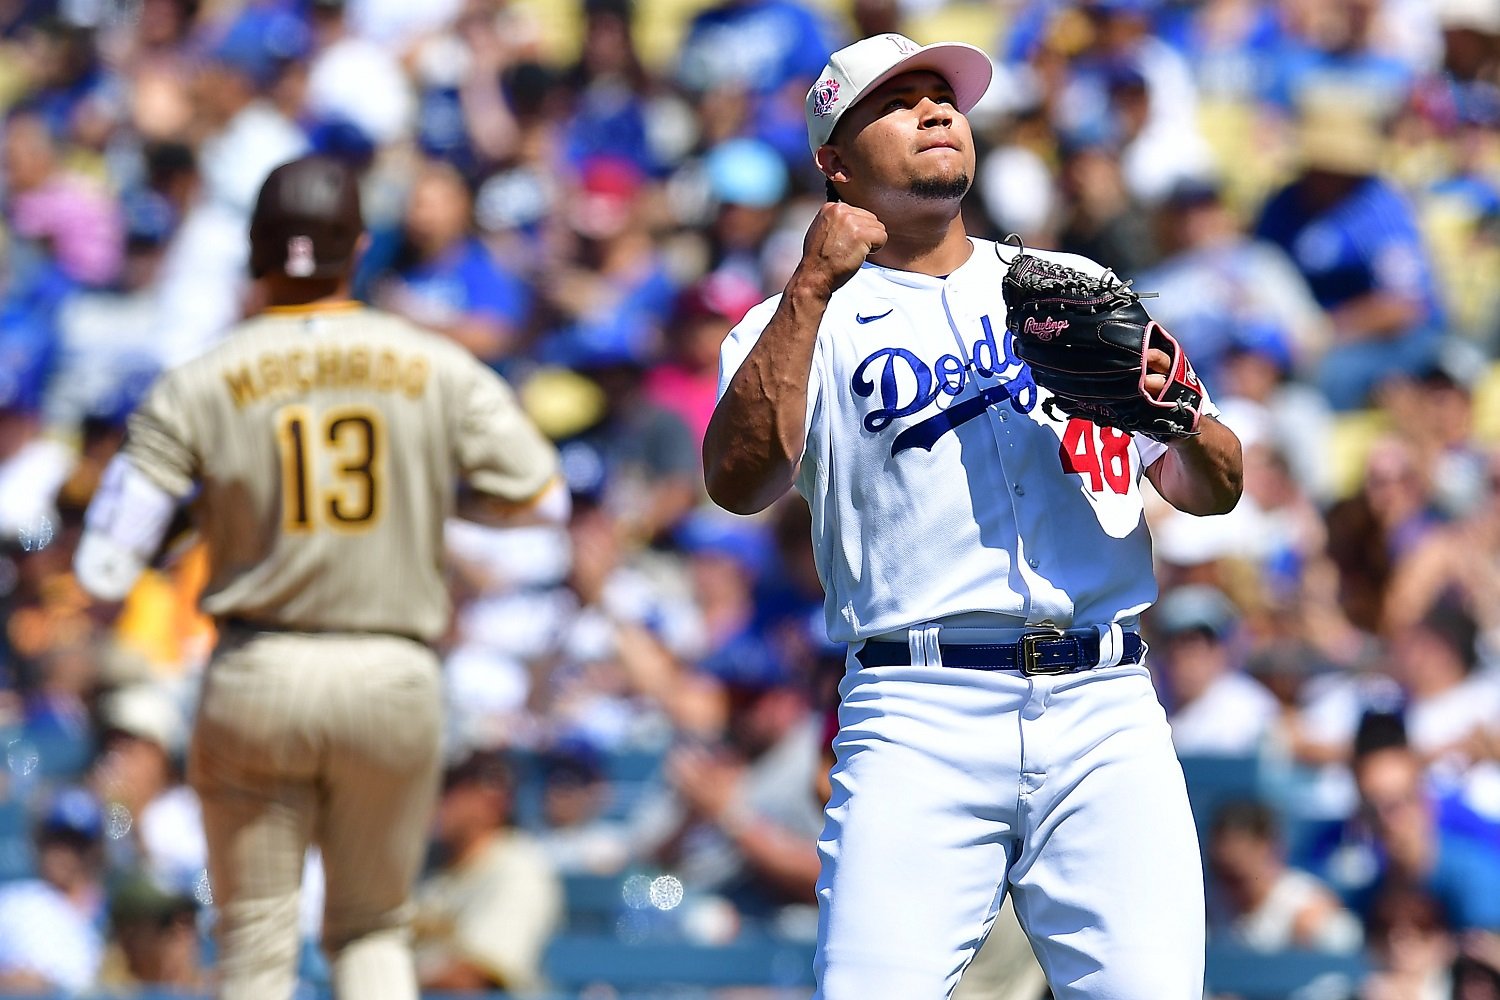 Twins-Dodgers series preview: A rare visit to Dodger Stadium